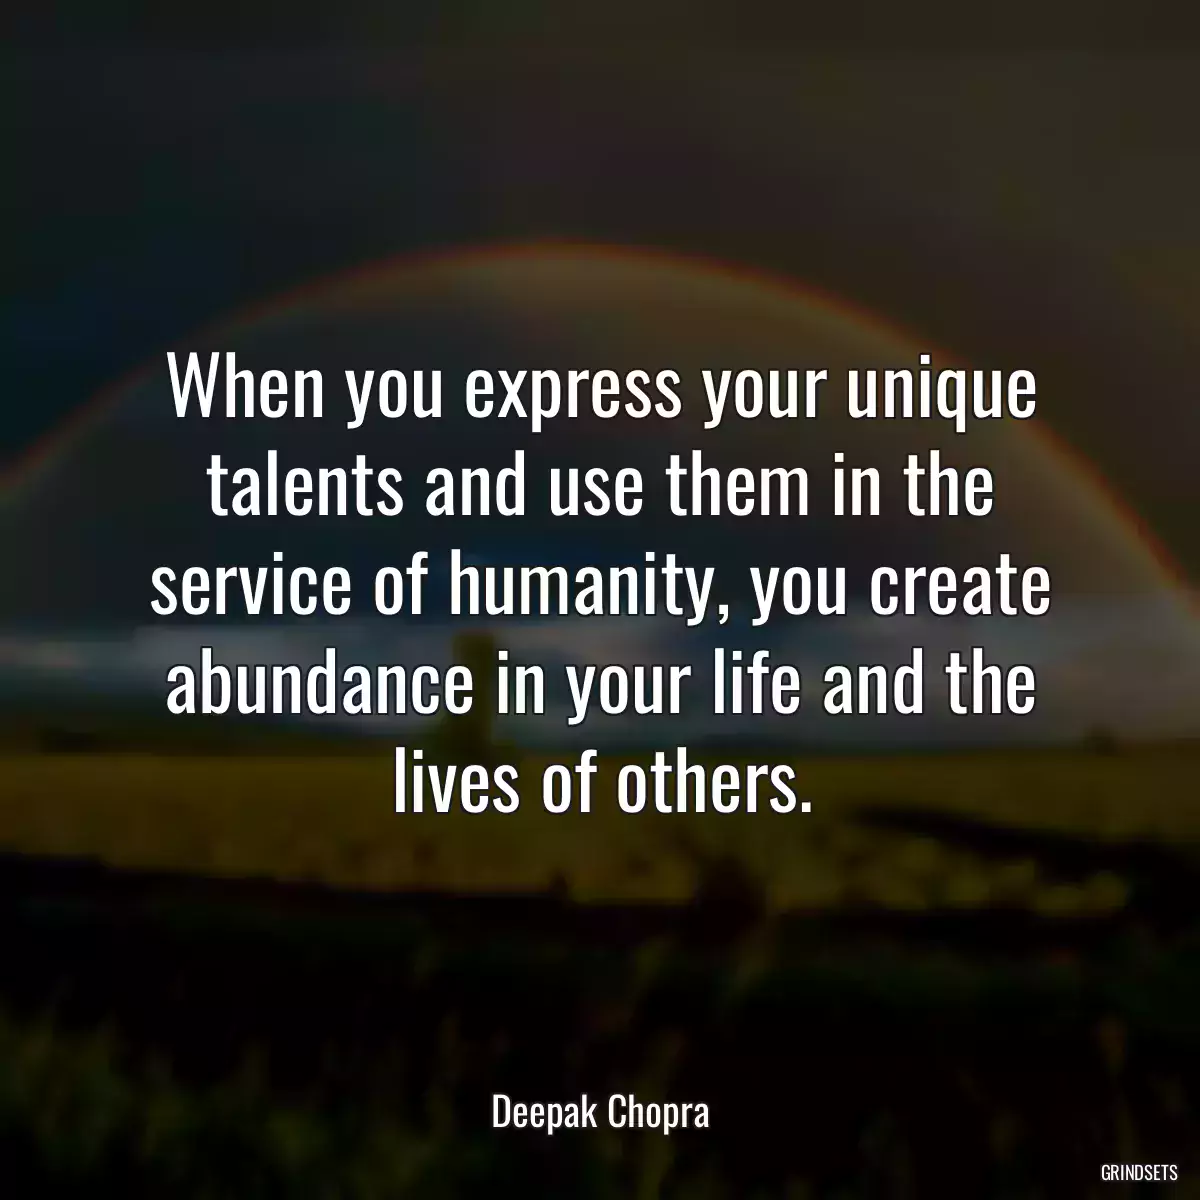 When you express your unique talents and use them in the service of humanity, you create abundance in your life and the lives of others.